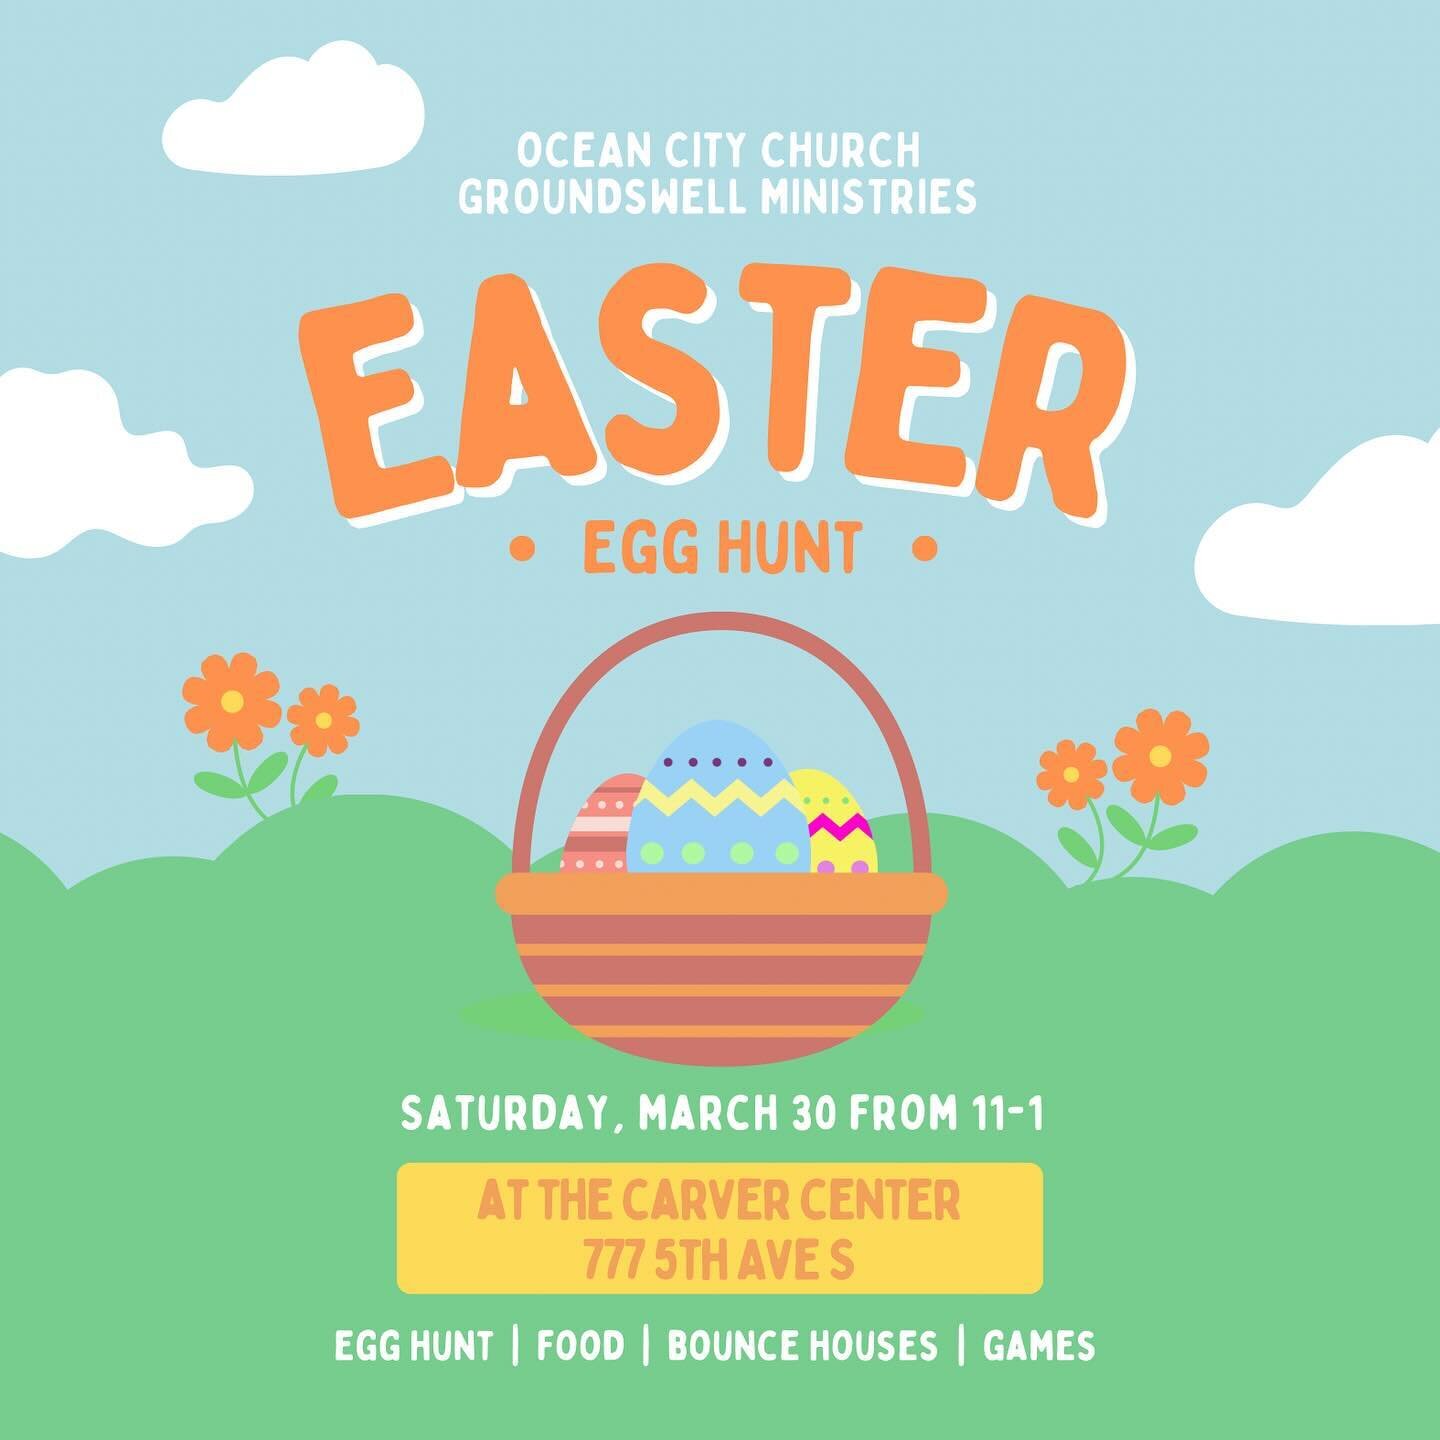 Mark your calendars for Saturday, March 30 to join us for our annual Easter Egg Hunt at the Carver Center! And don&rsquo;t forget to bring in your bags of wrapped non-chocolate candy to help us prep for the festivities. We hope you are as excited as 